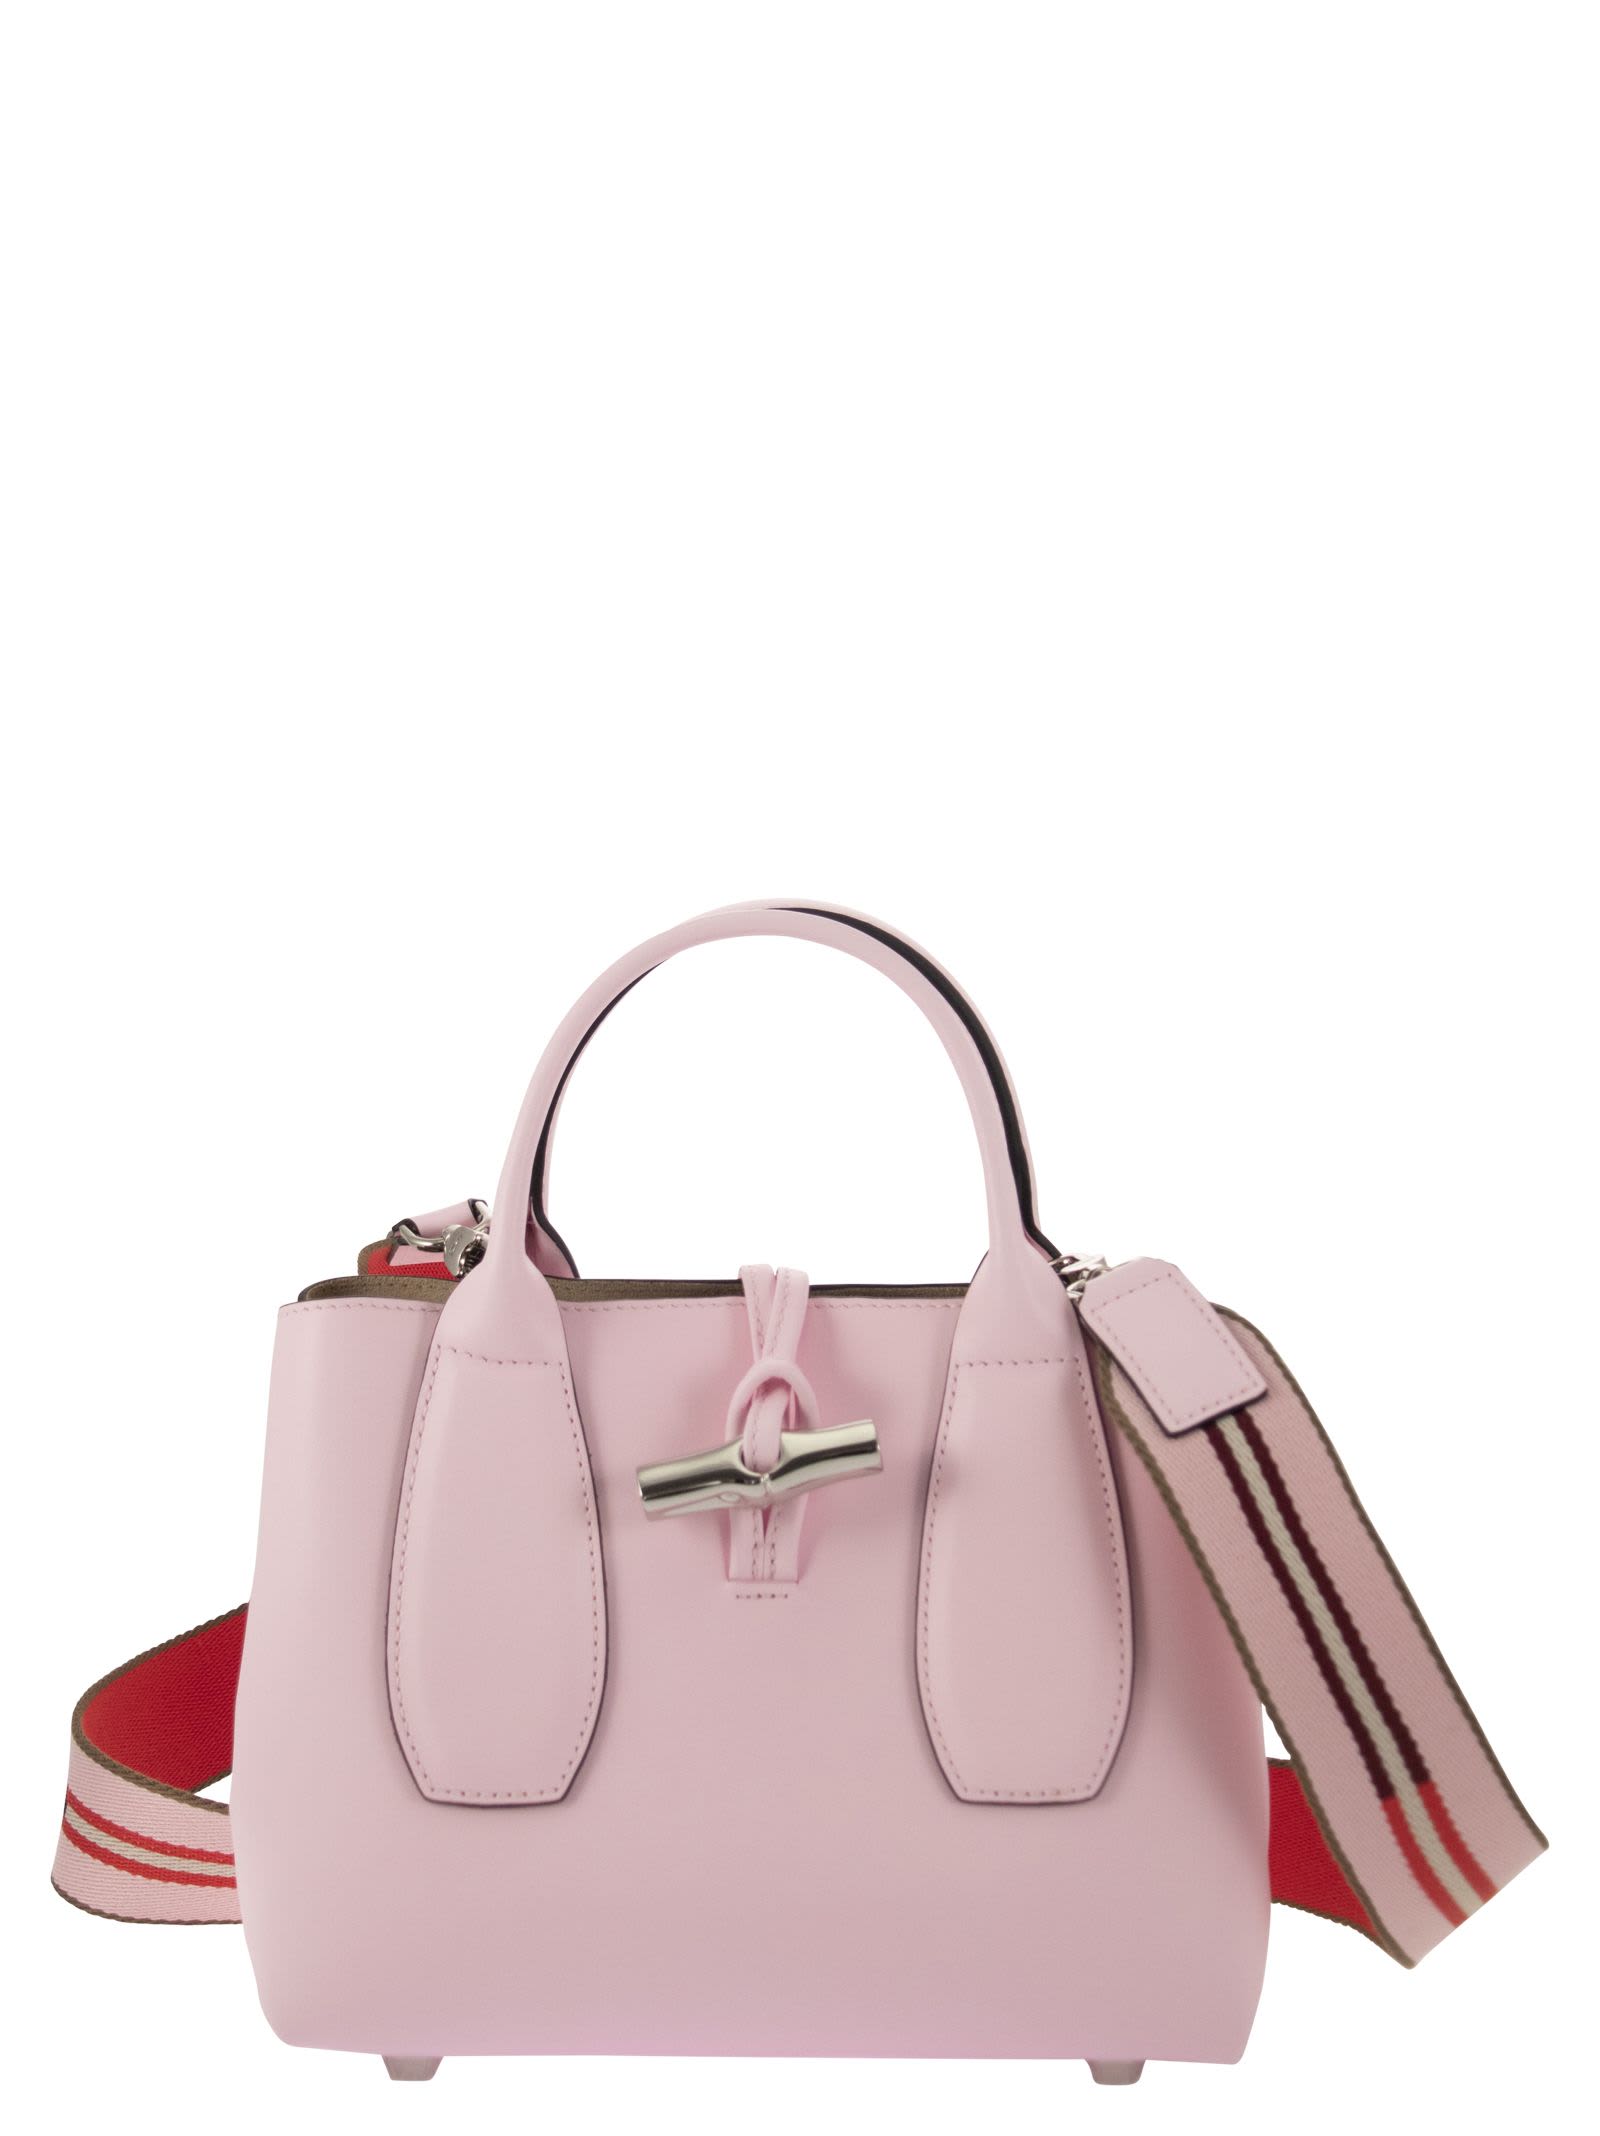 Longchamp Roseau - Bag With Handle S In Pink